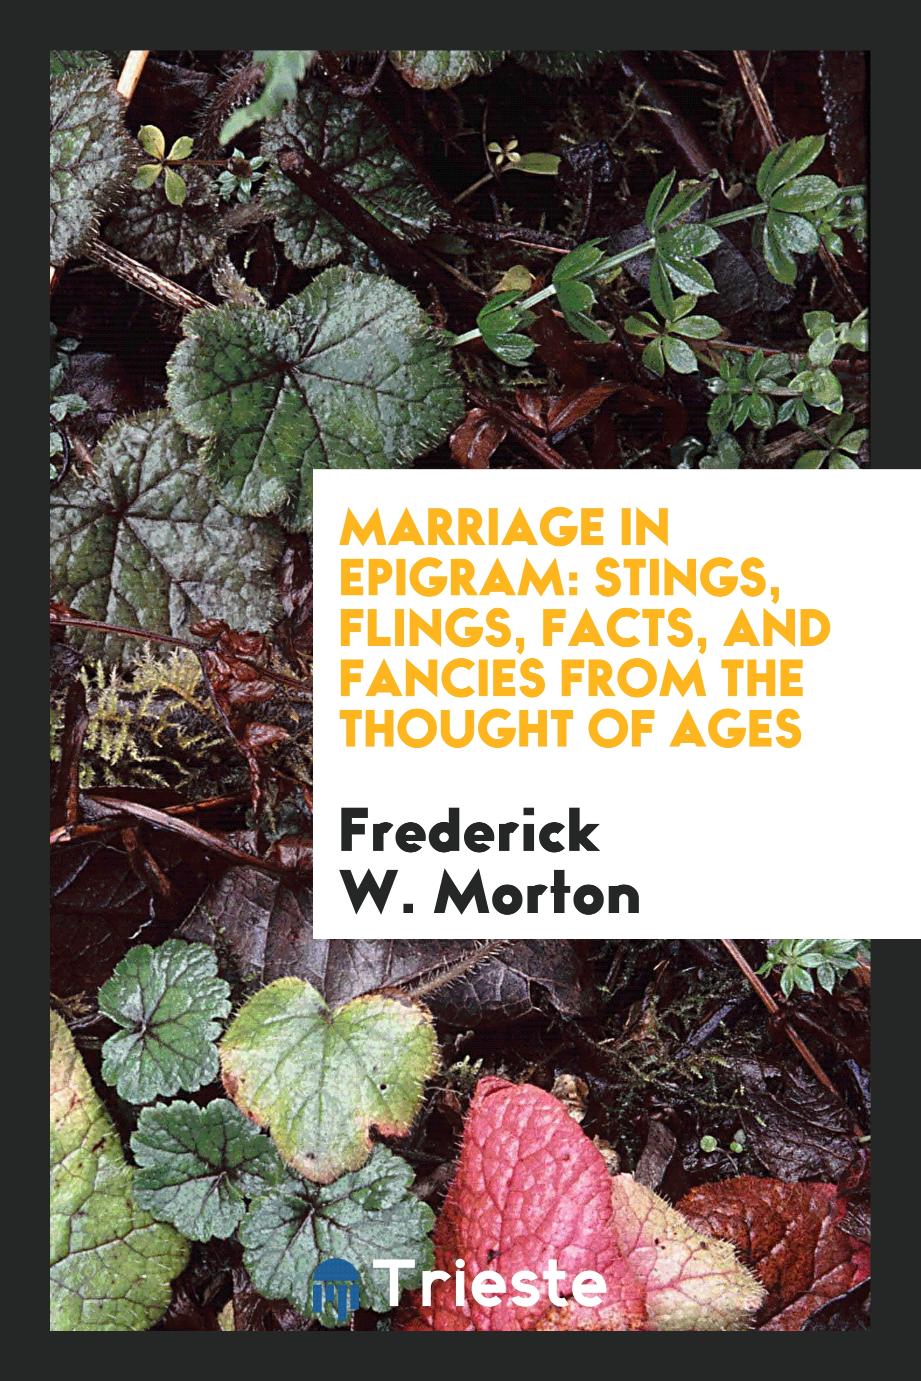 Marriage in Epigram: Stings, Flings, Facts, and Fancies from the Thought of Ages